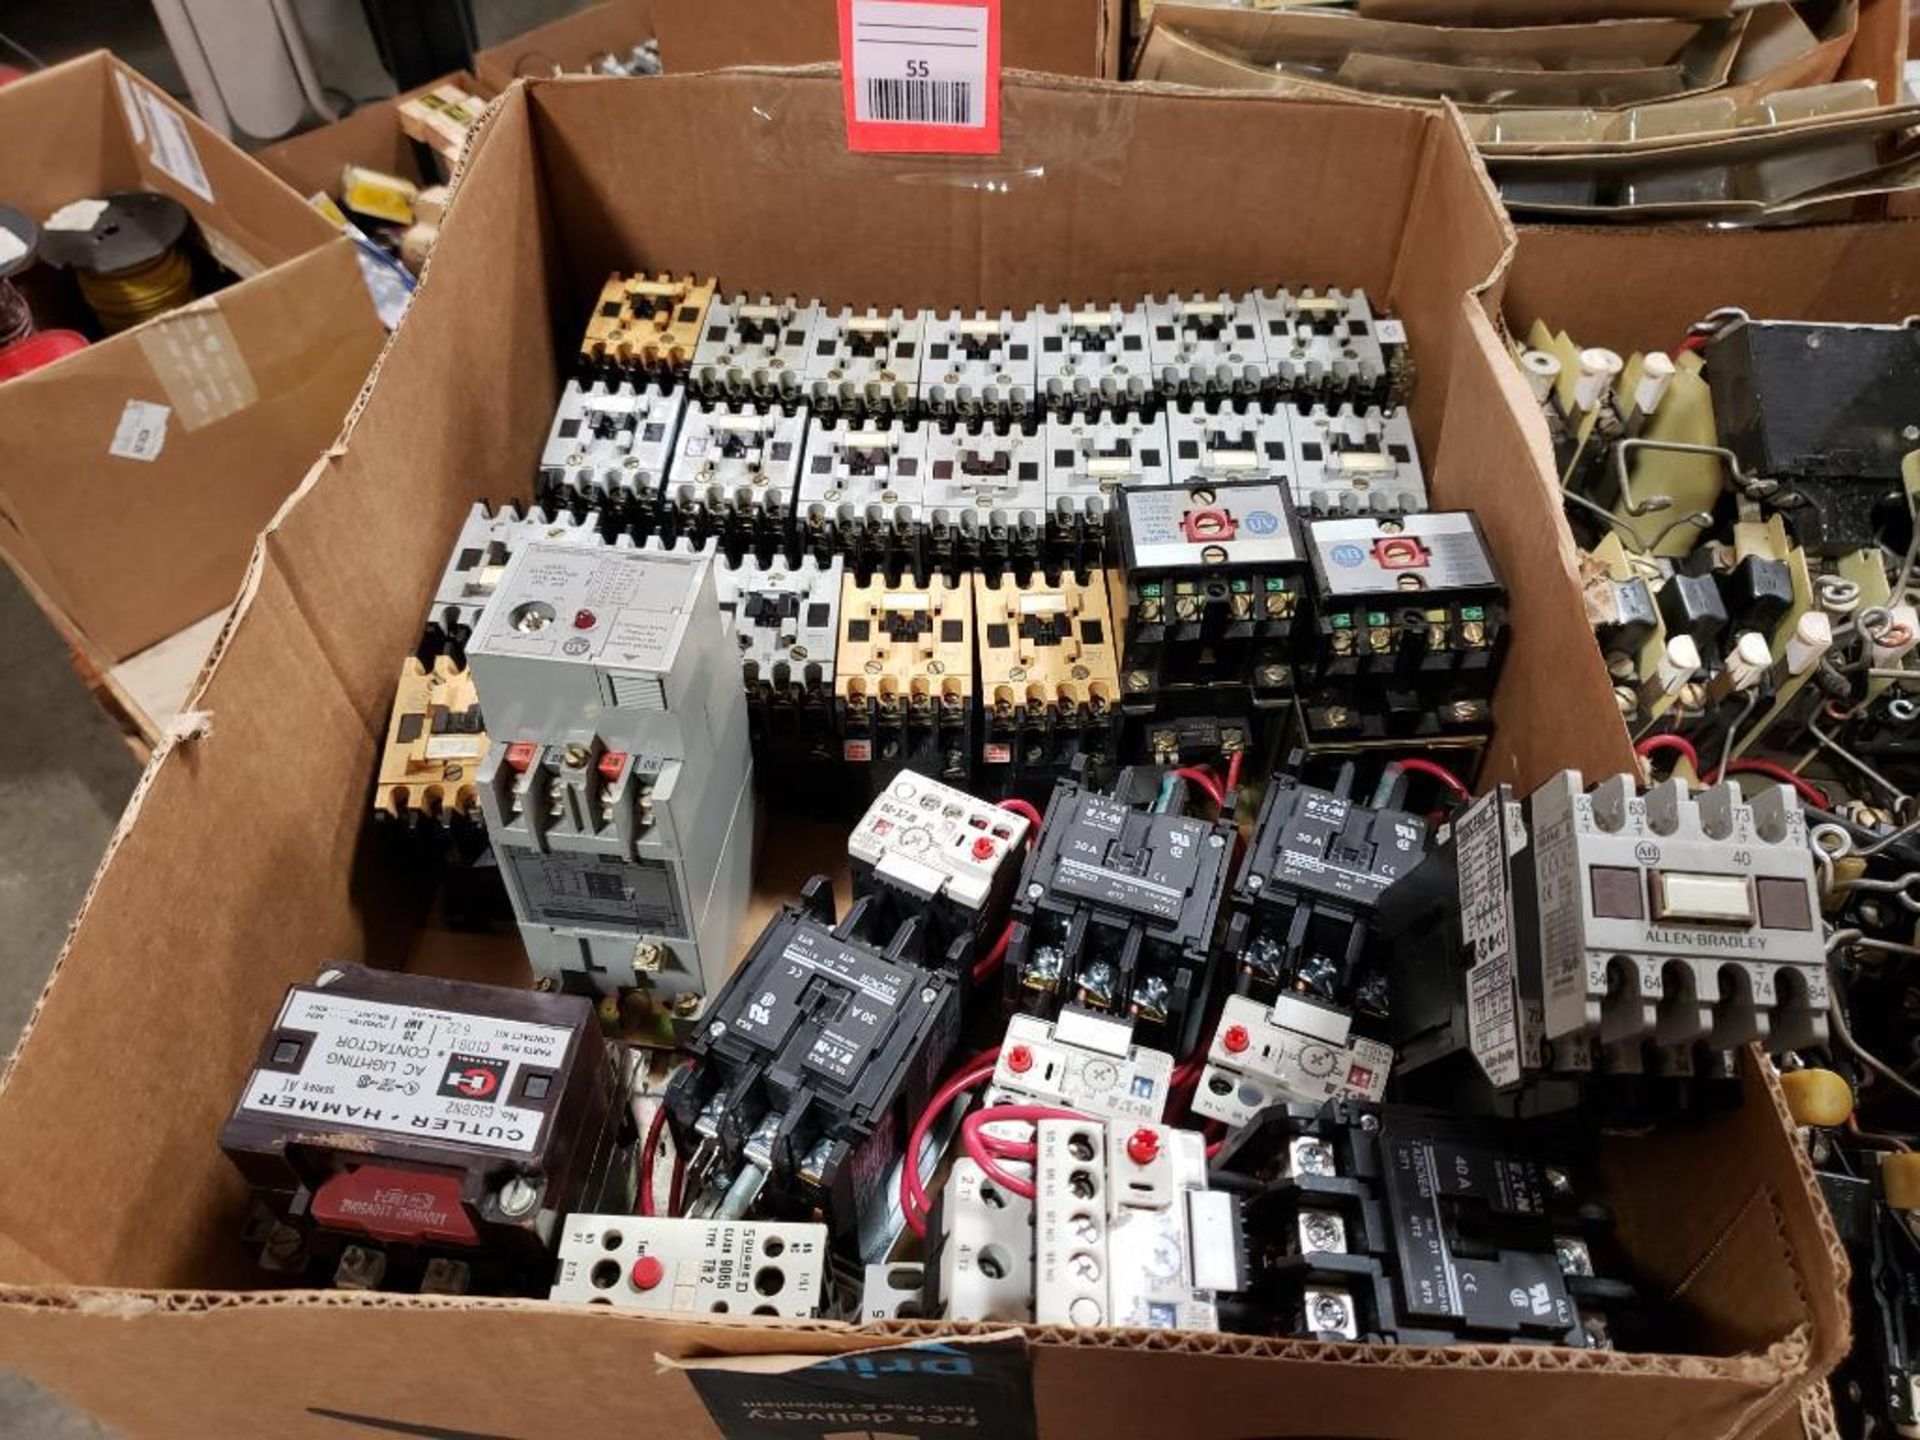 Assorted electrical contactor, relays. Cutler Hammer, Allen Bradley, Square-D, Eaton.